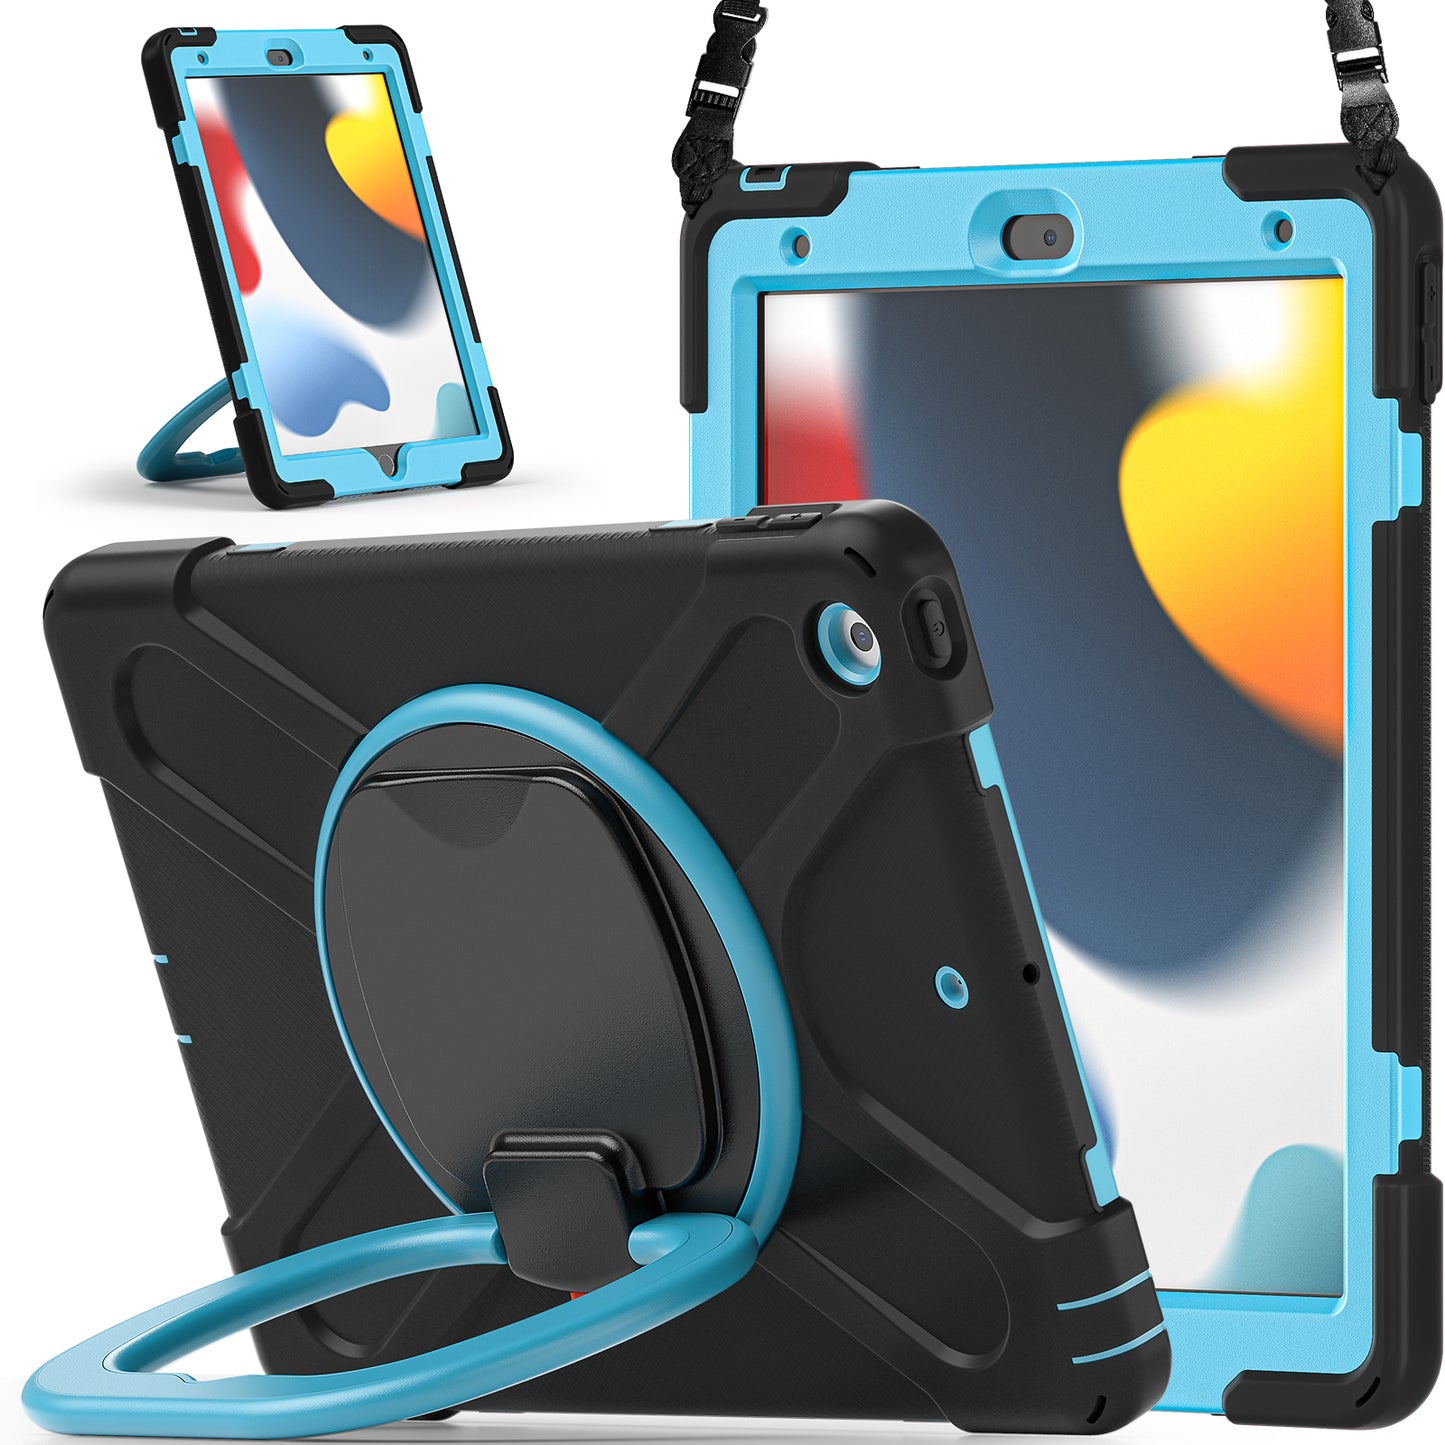 Pirate Box iPad 9 Case Hook Stand Rotating with Hand Holder Shoulder Strap